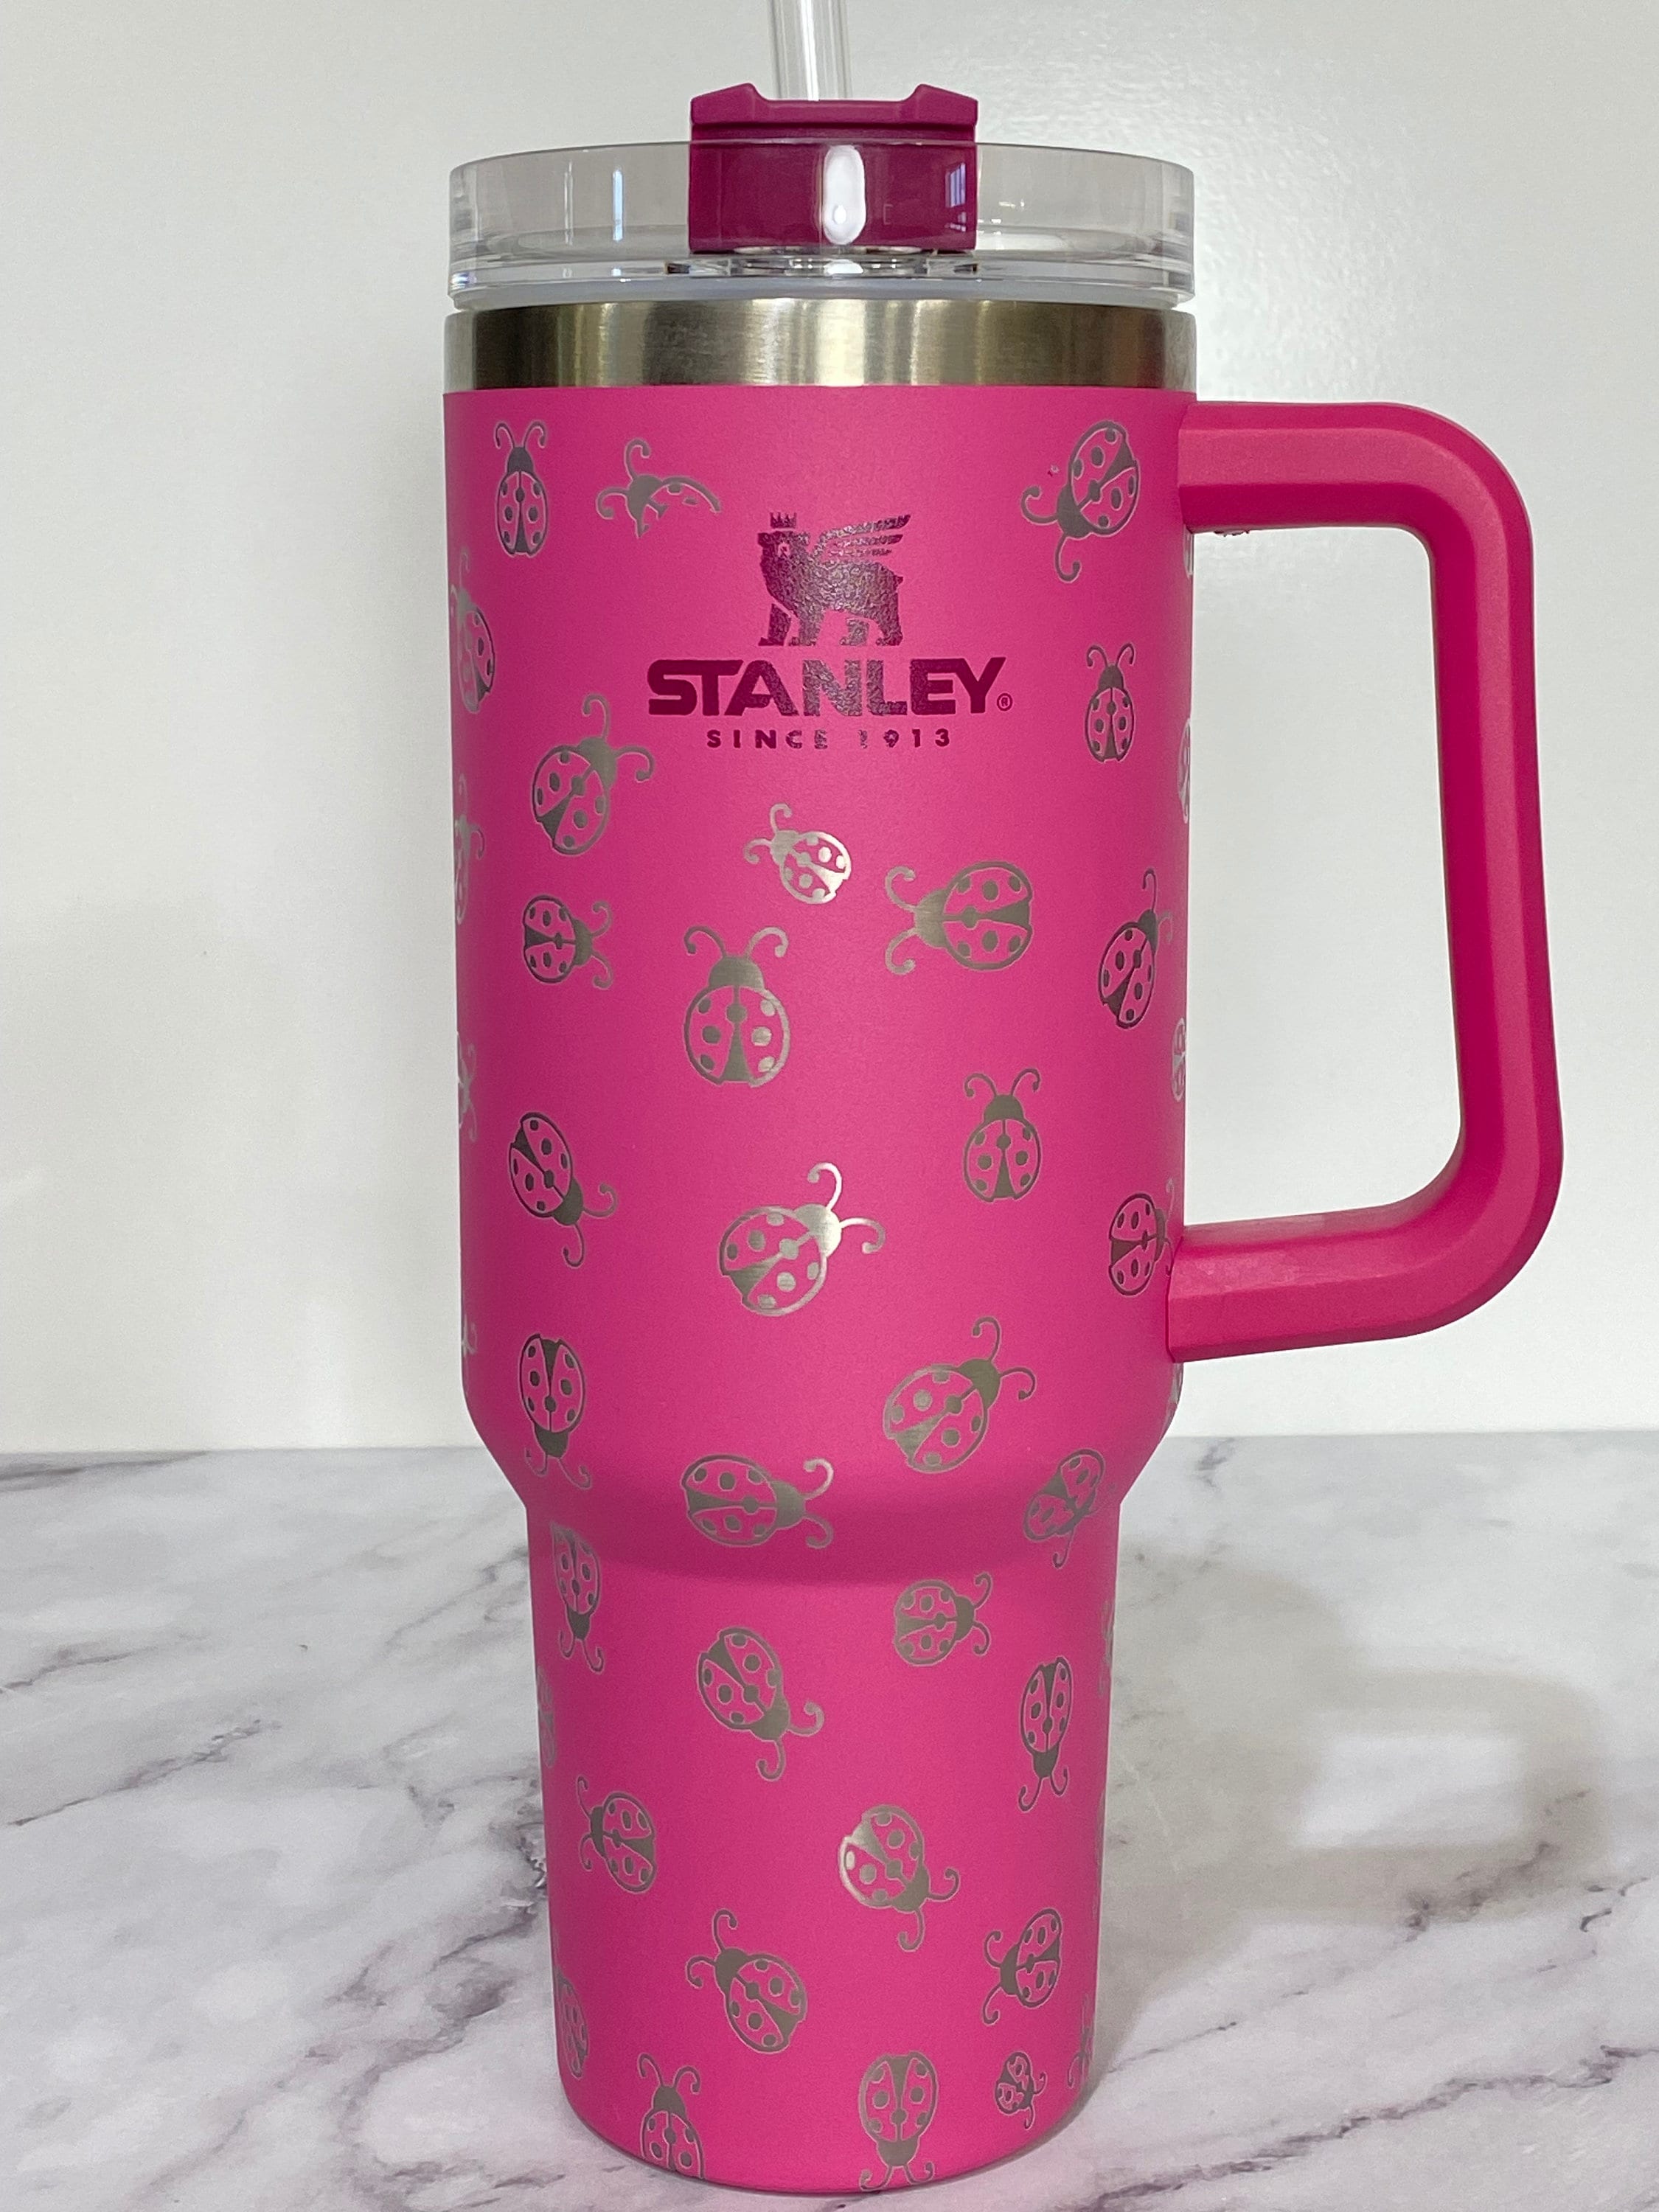 Sunflower Design 40oz Tumbler With Handle, Lid, Straw, Laser Engraved  Tumbler, Stanley Quencher, Non Brand, Personalized, Stanley Tumbler 